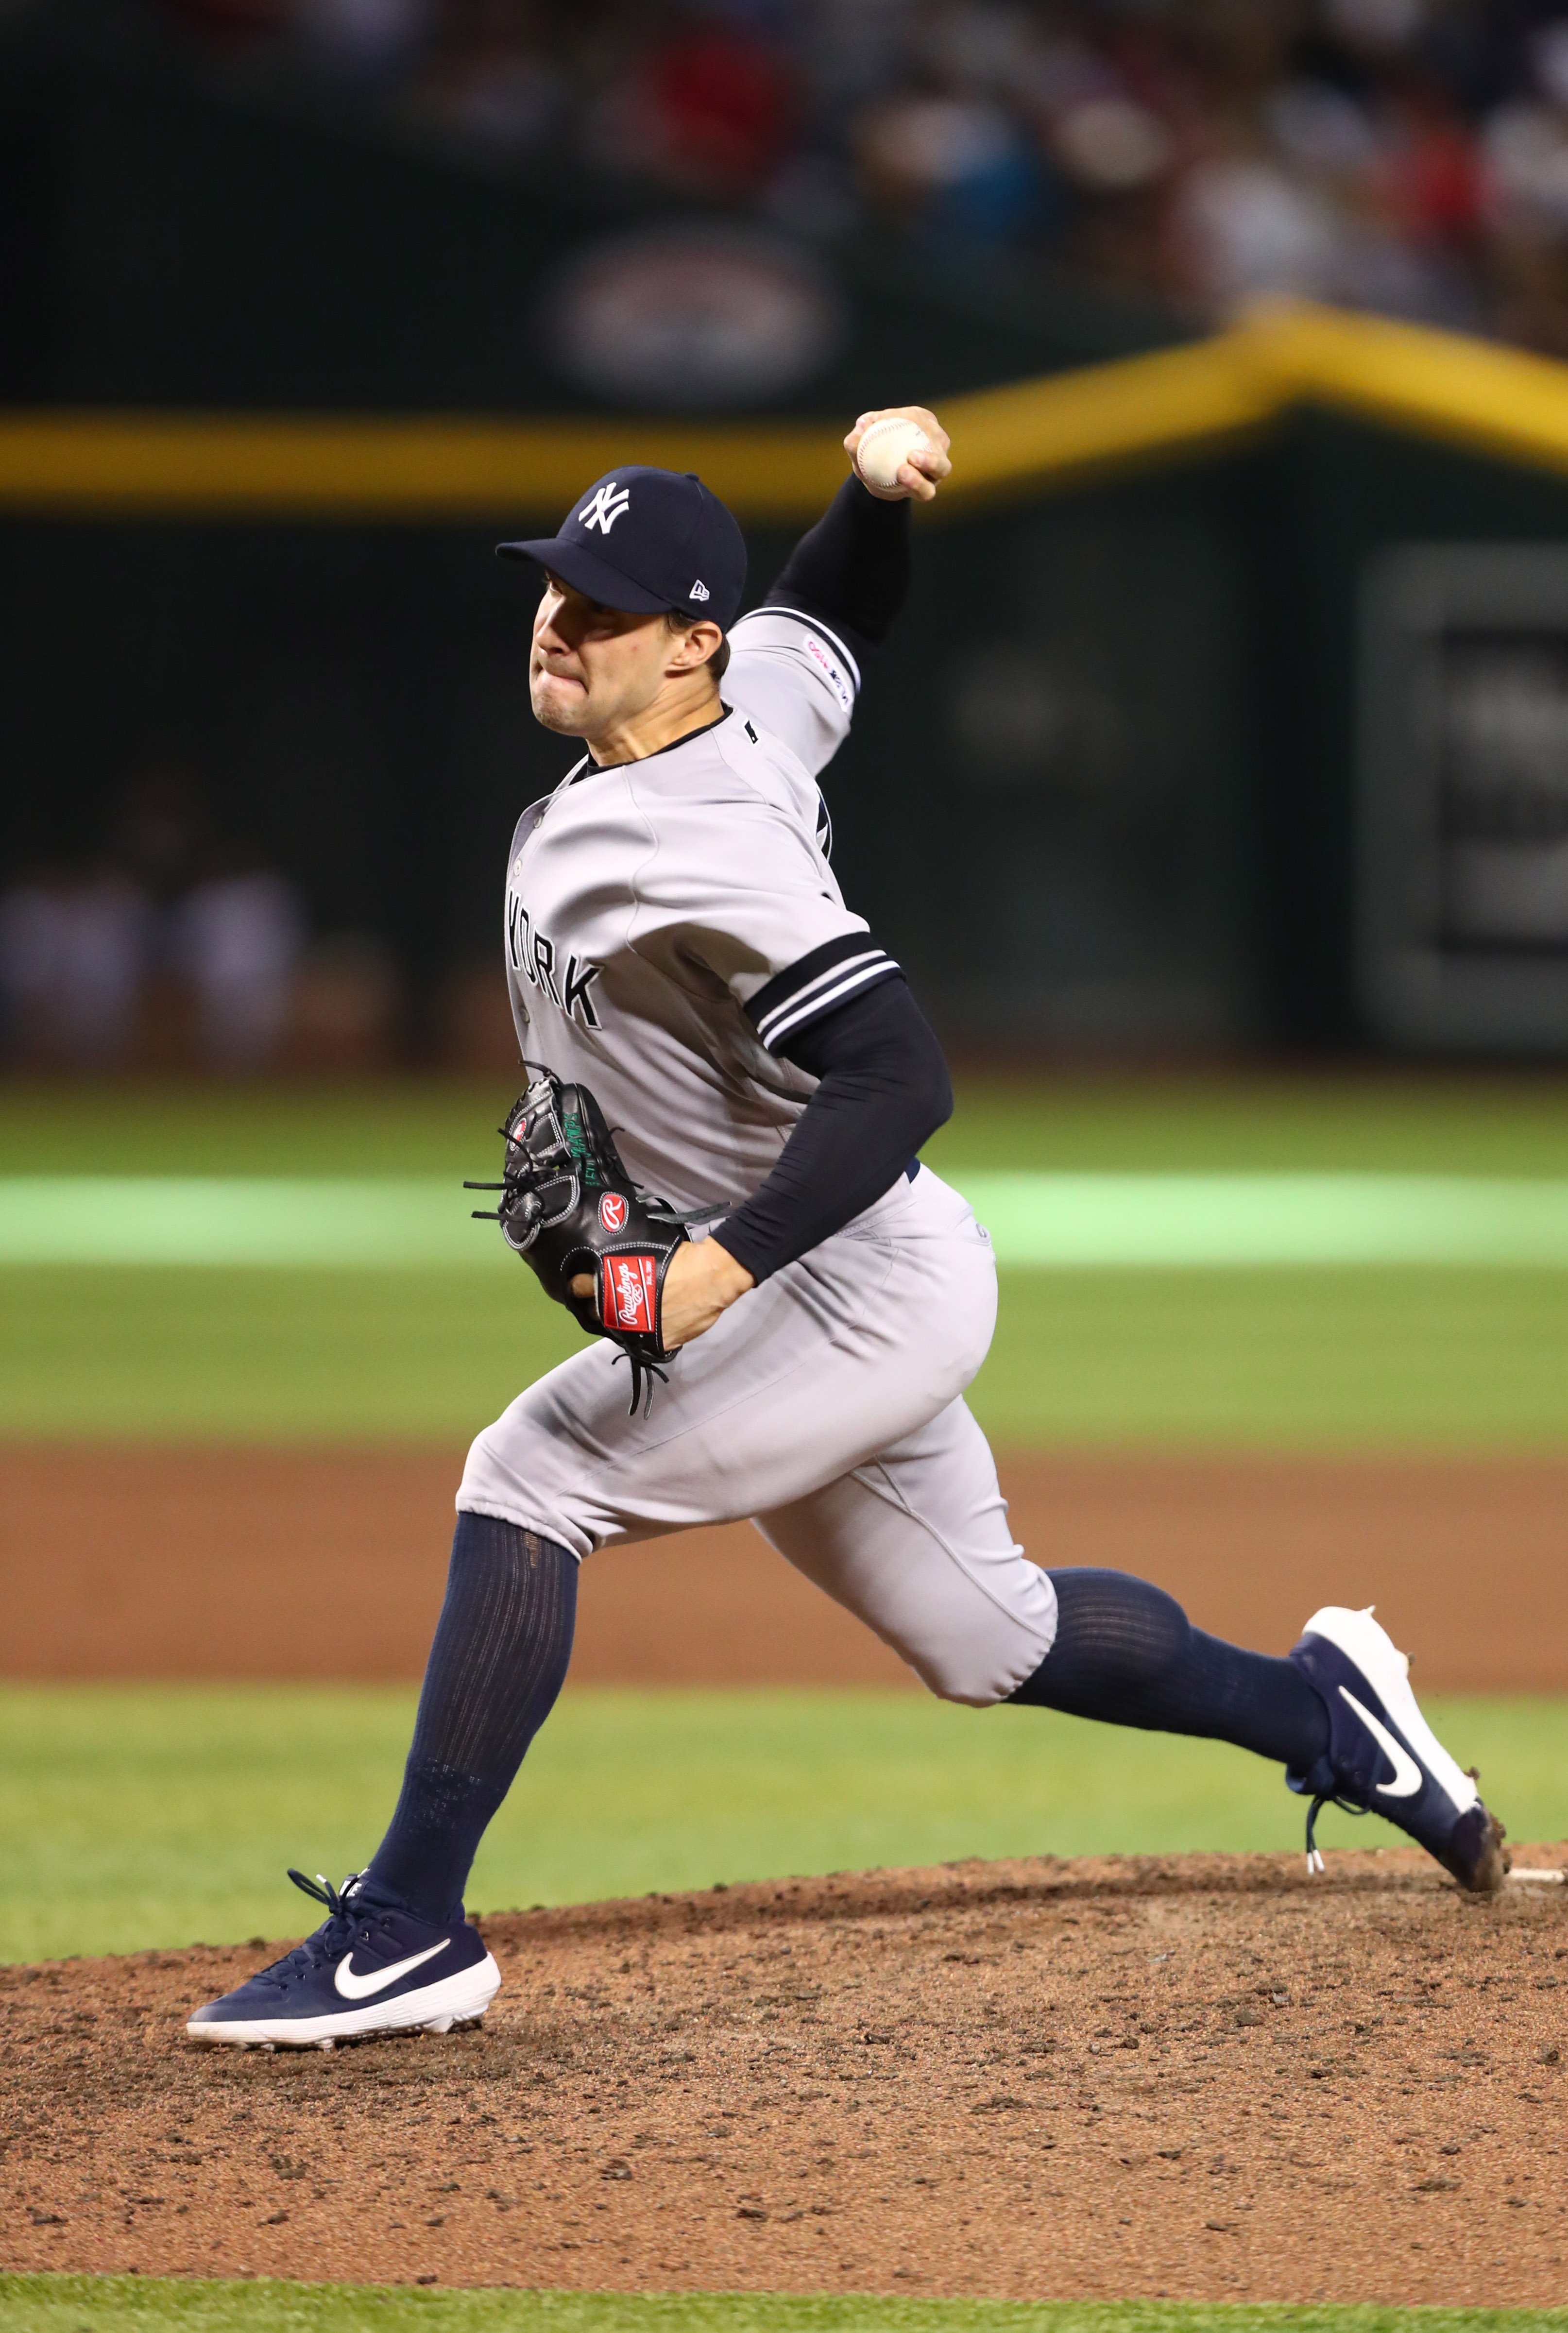 Yankees' Tommy Kahnle shut down for 10 days with injury